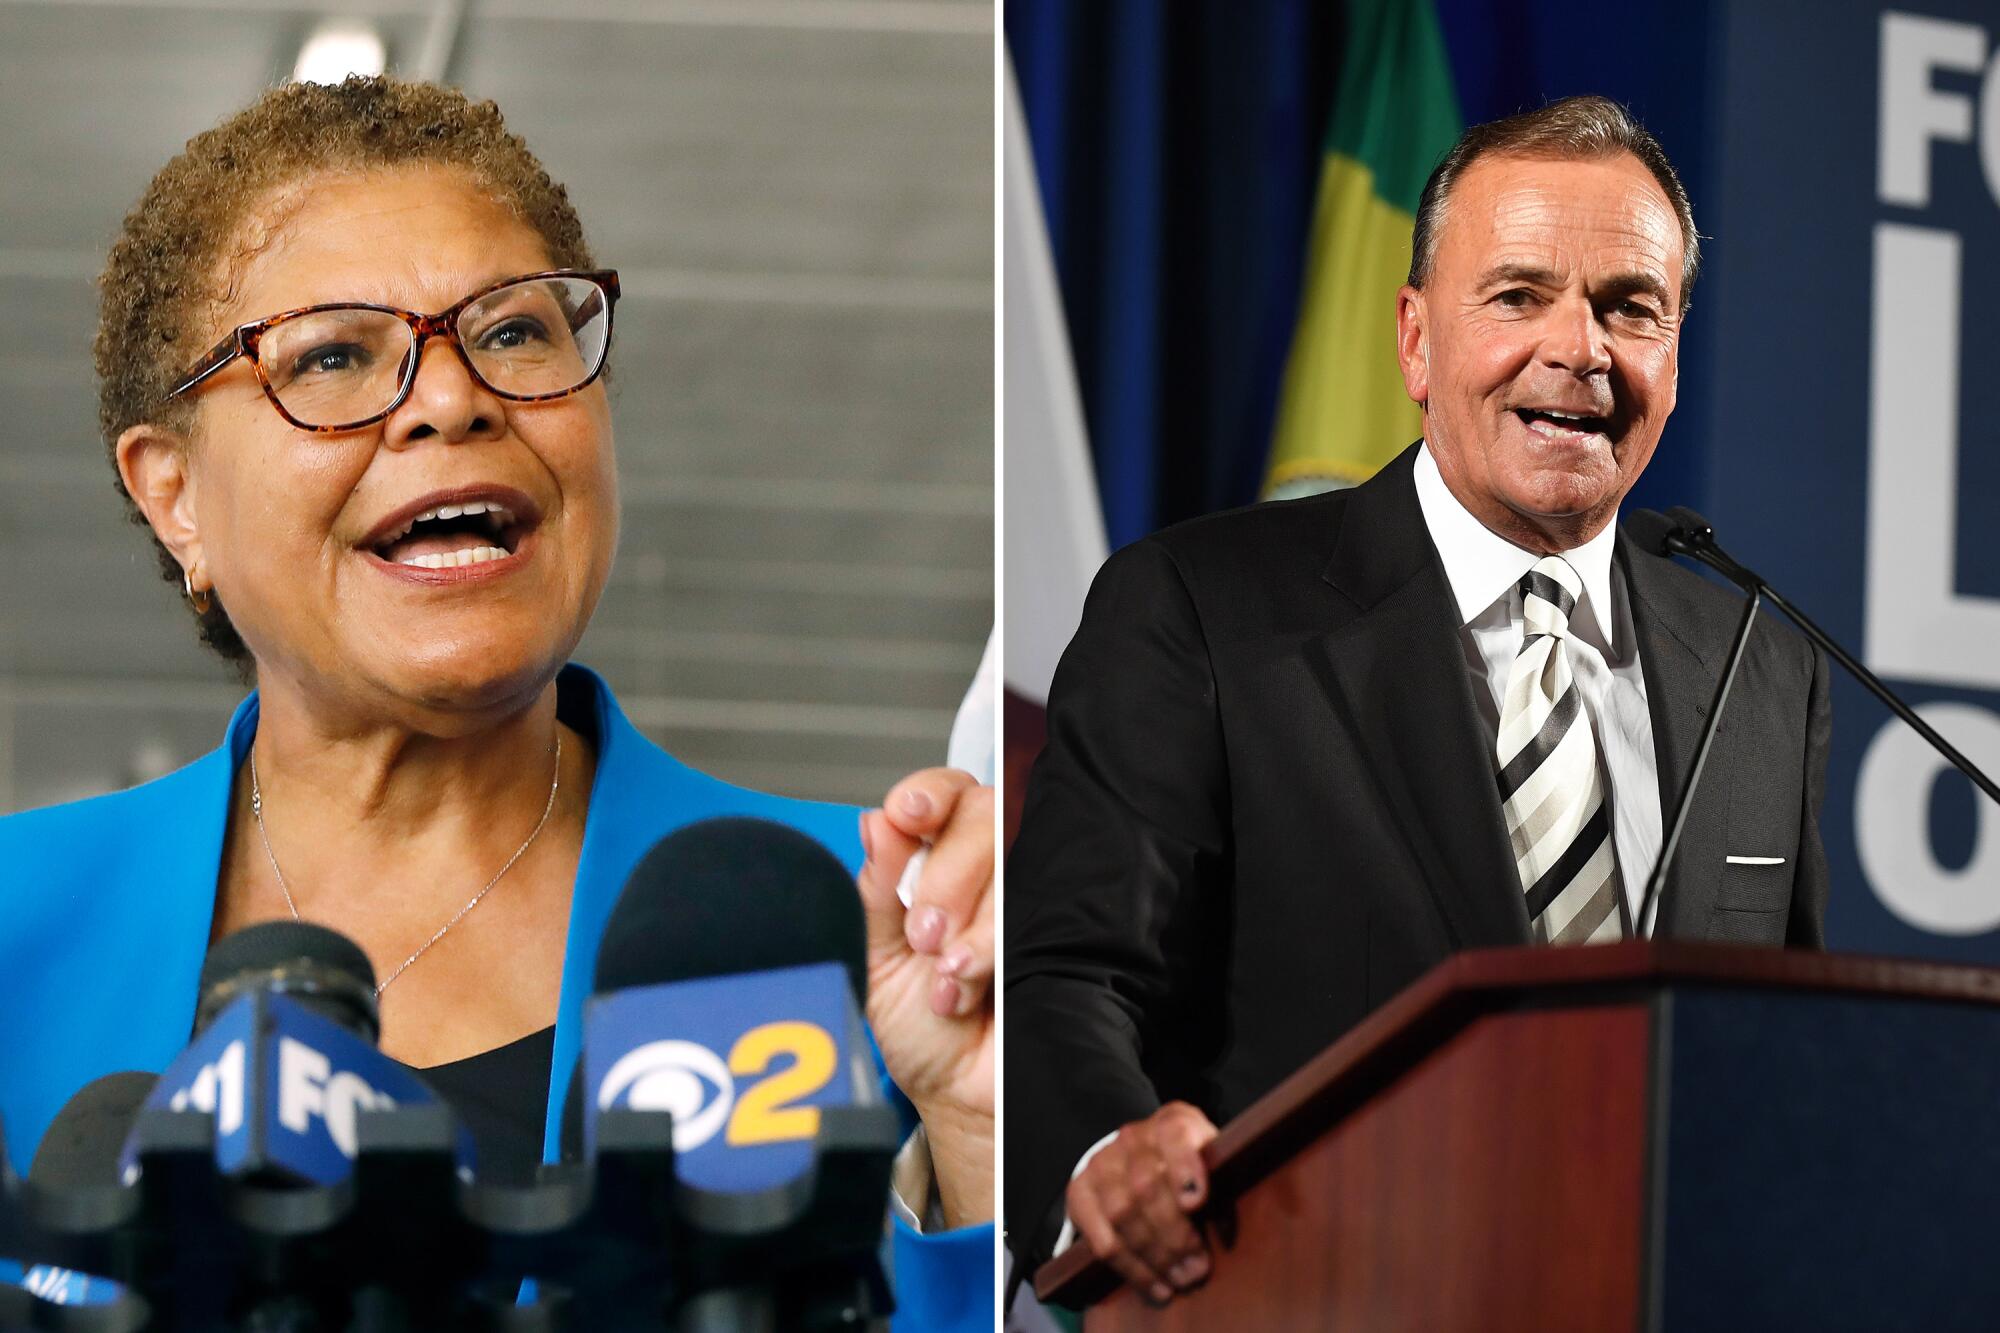 Los Angeles mayoral candidates Karen Bass, left, and Rick Caruso